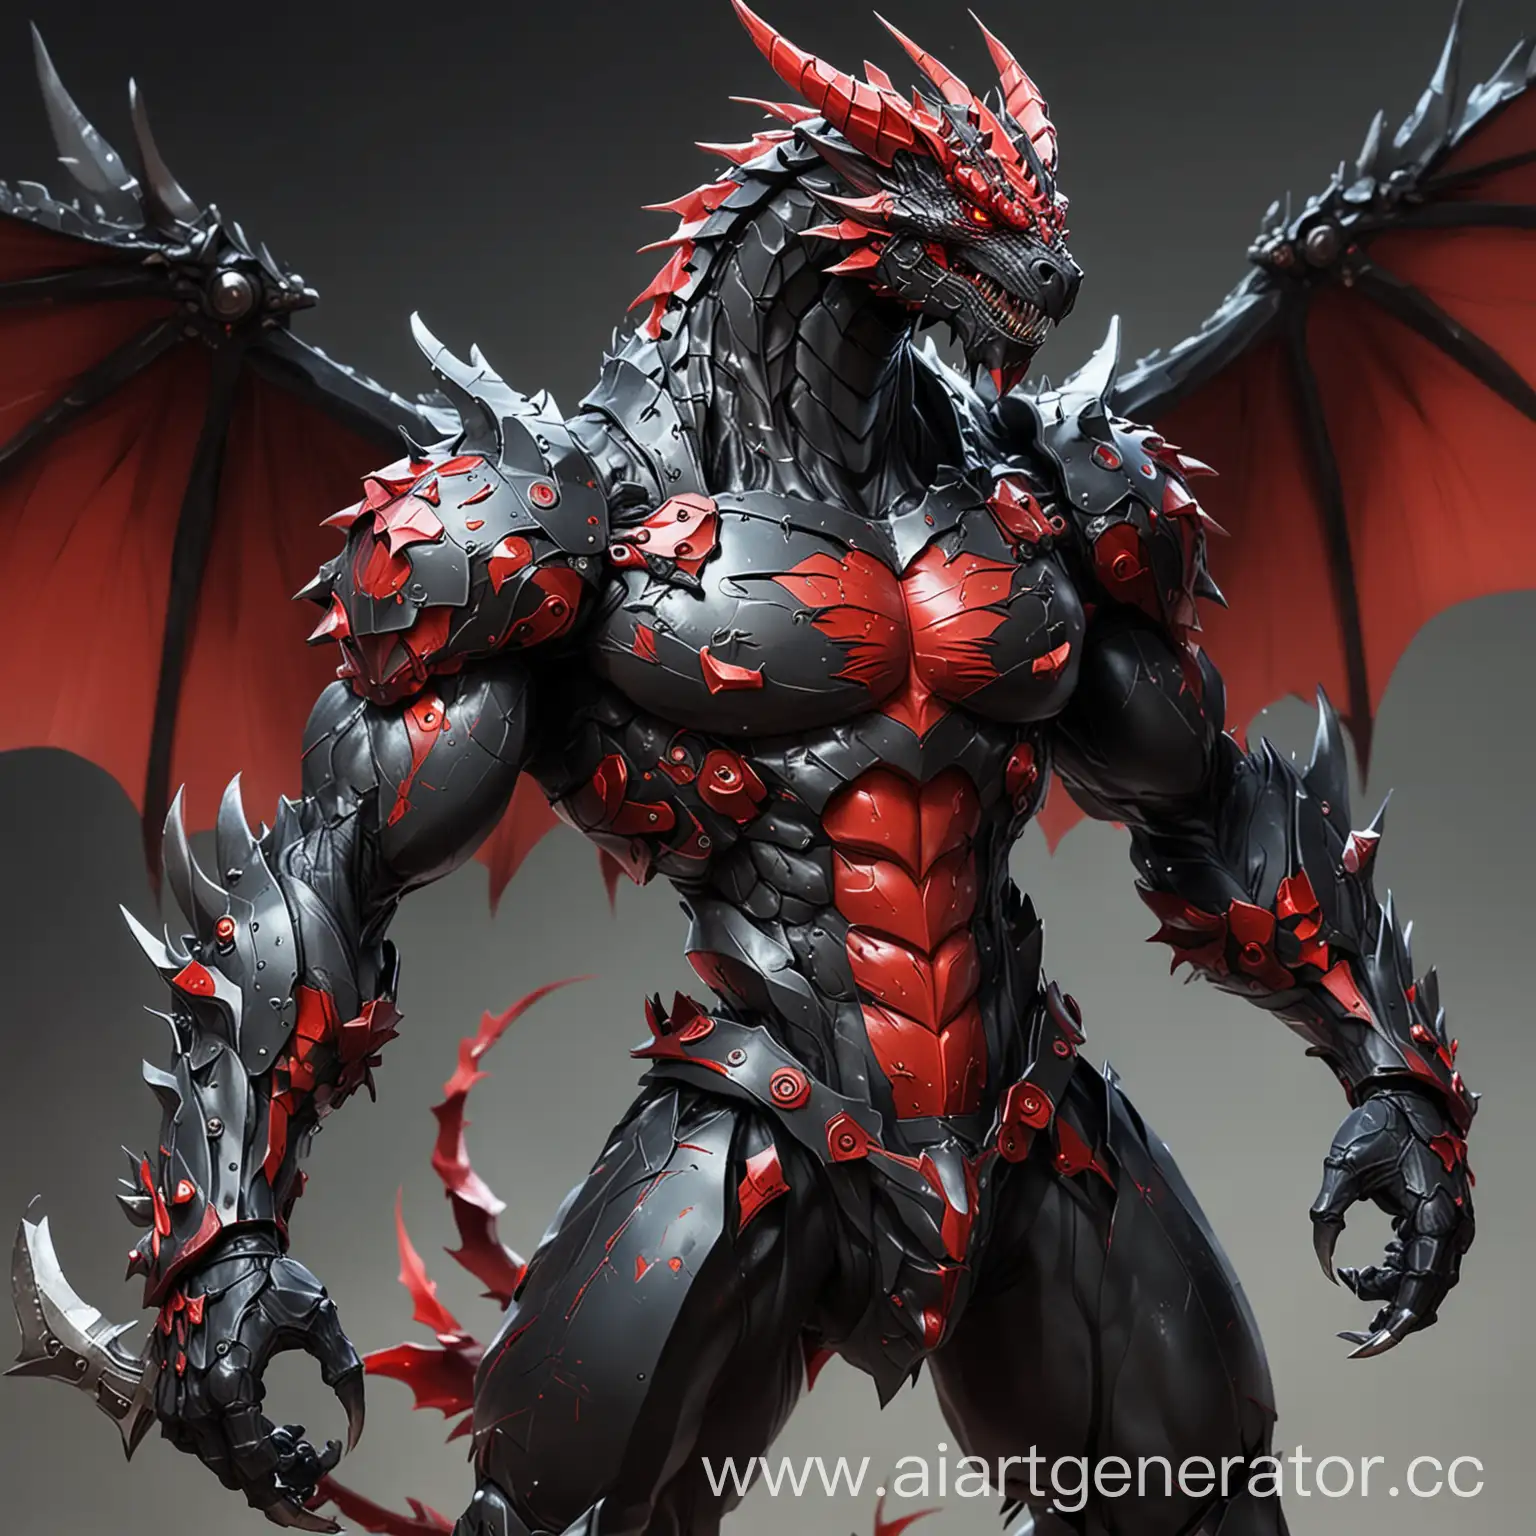 Powerful-Blacksmith-Dragonoid-with-Fiery-Red-Scales-Anime-Style-Artwork